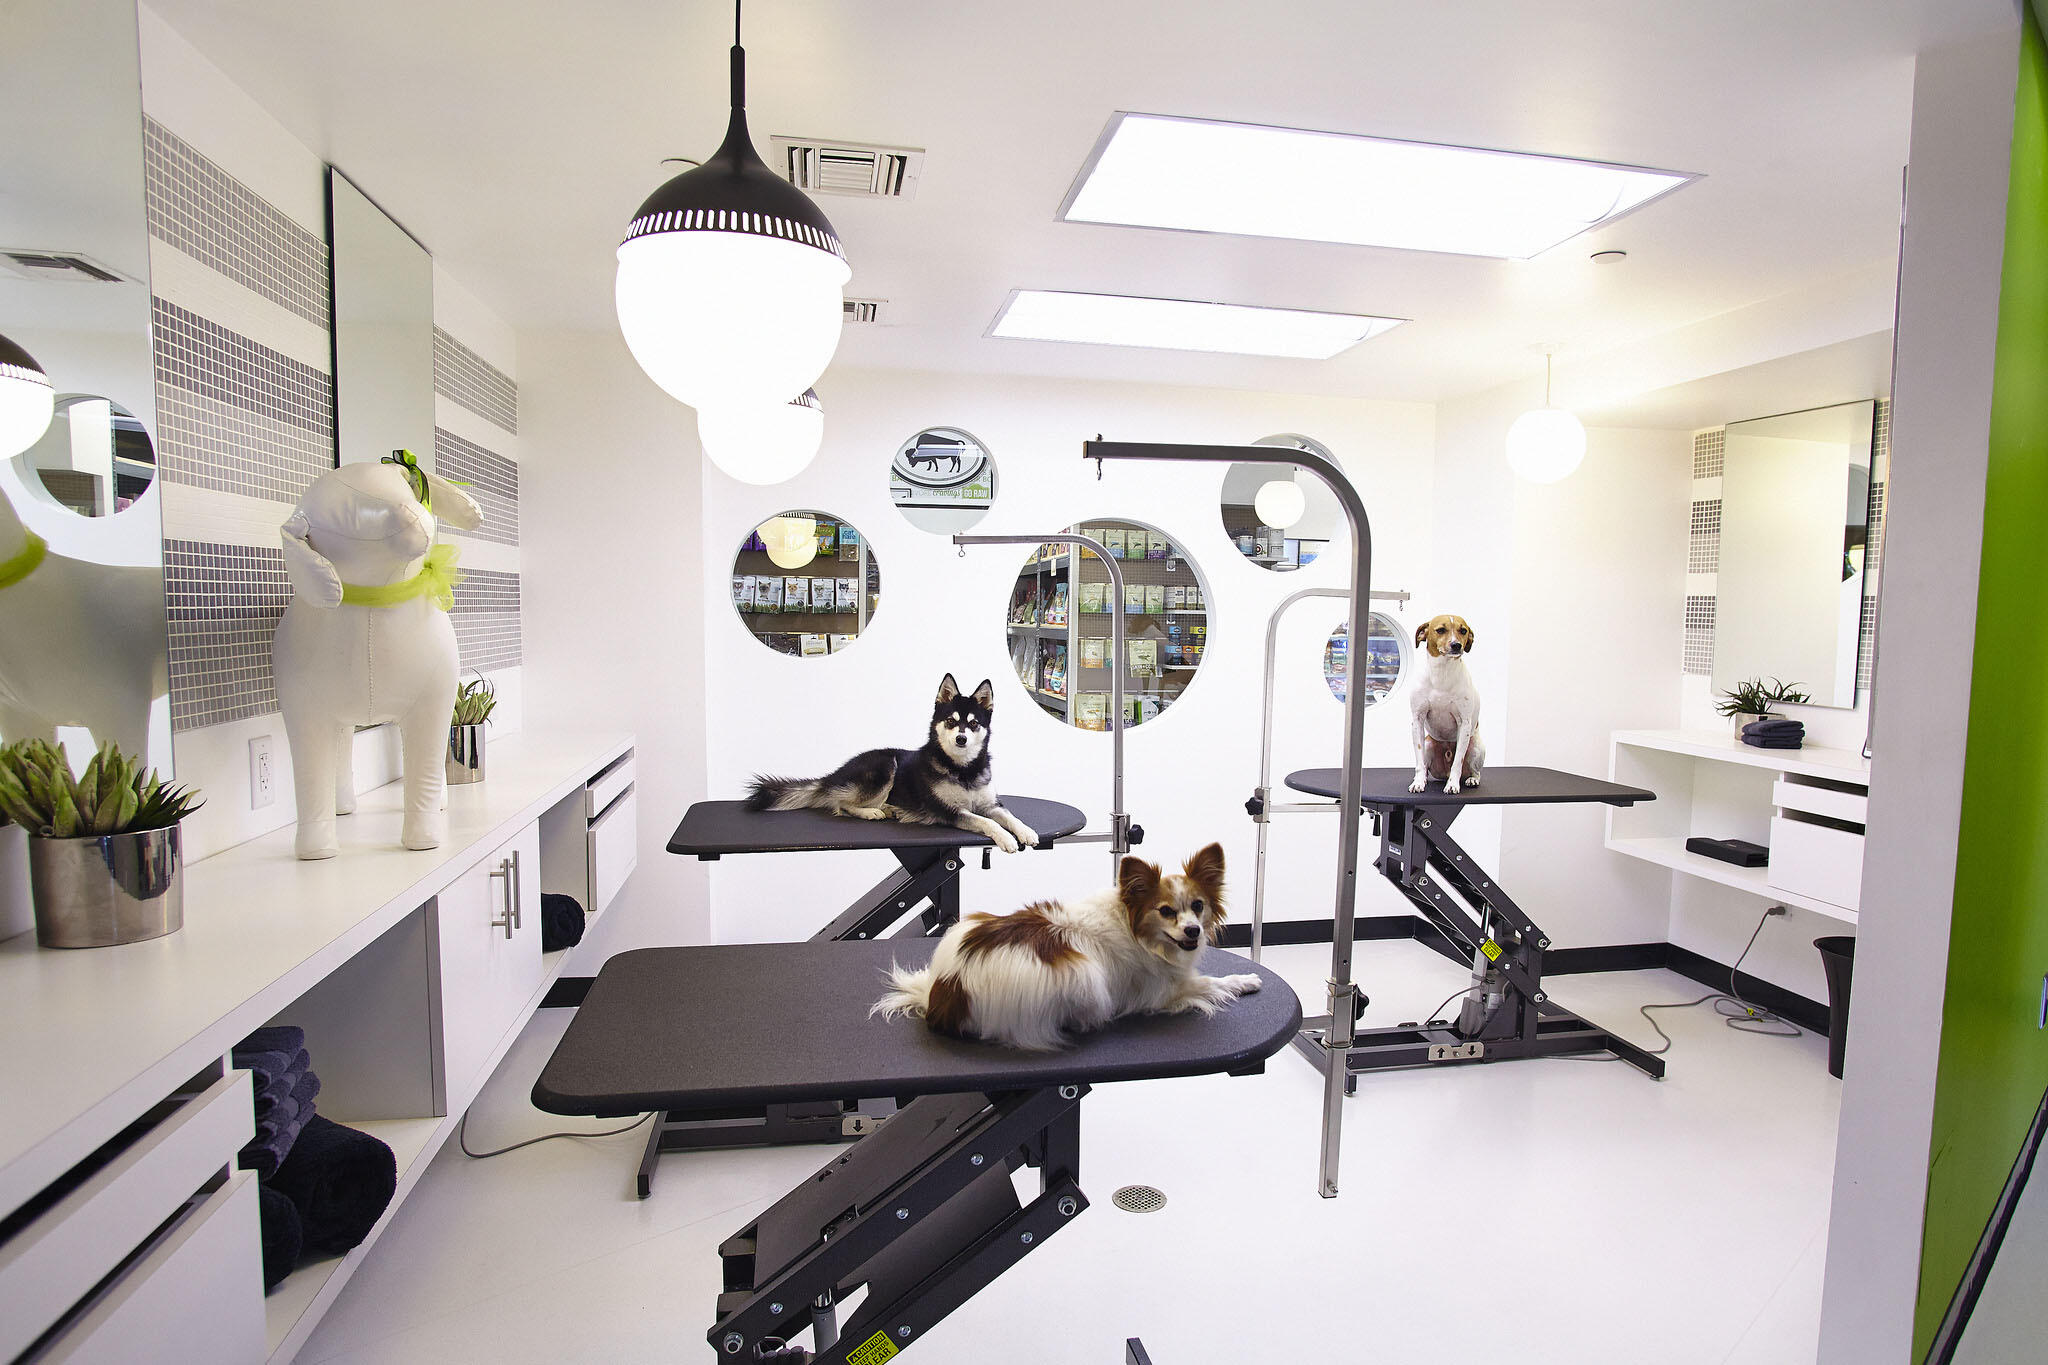 Pooch Pampering: Beverly Hills has Gone 